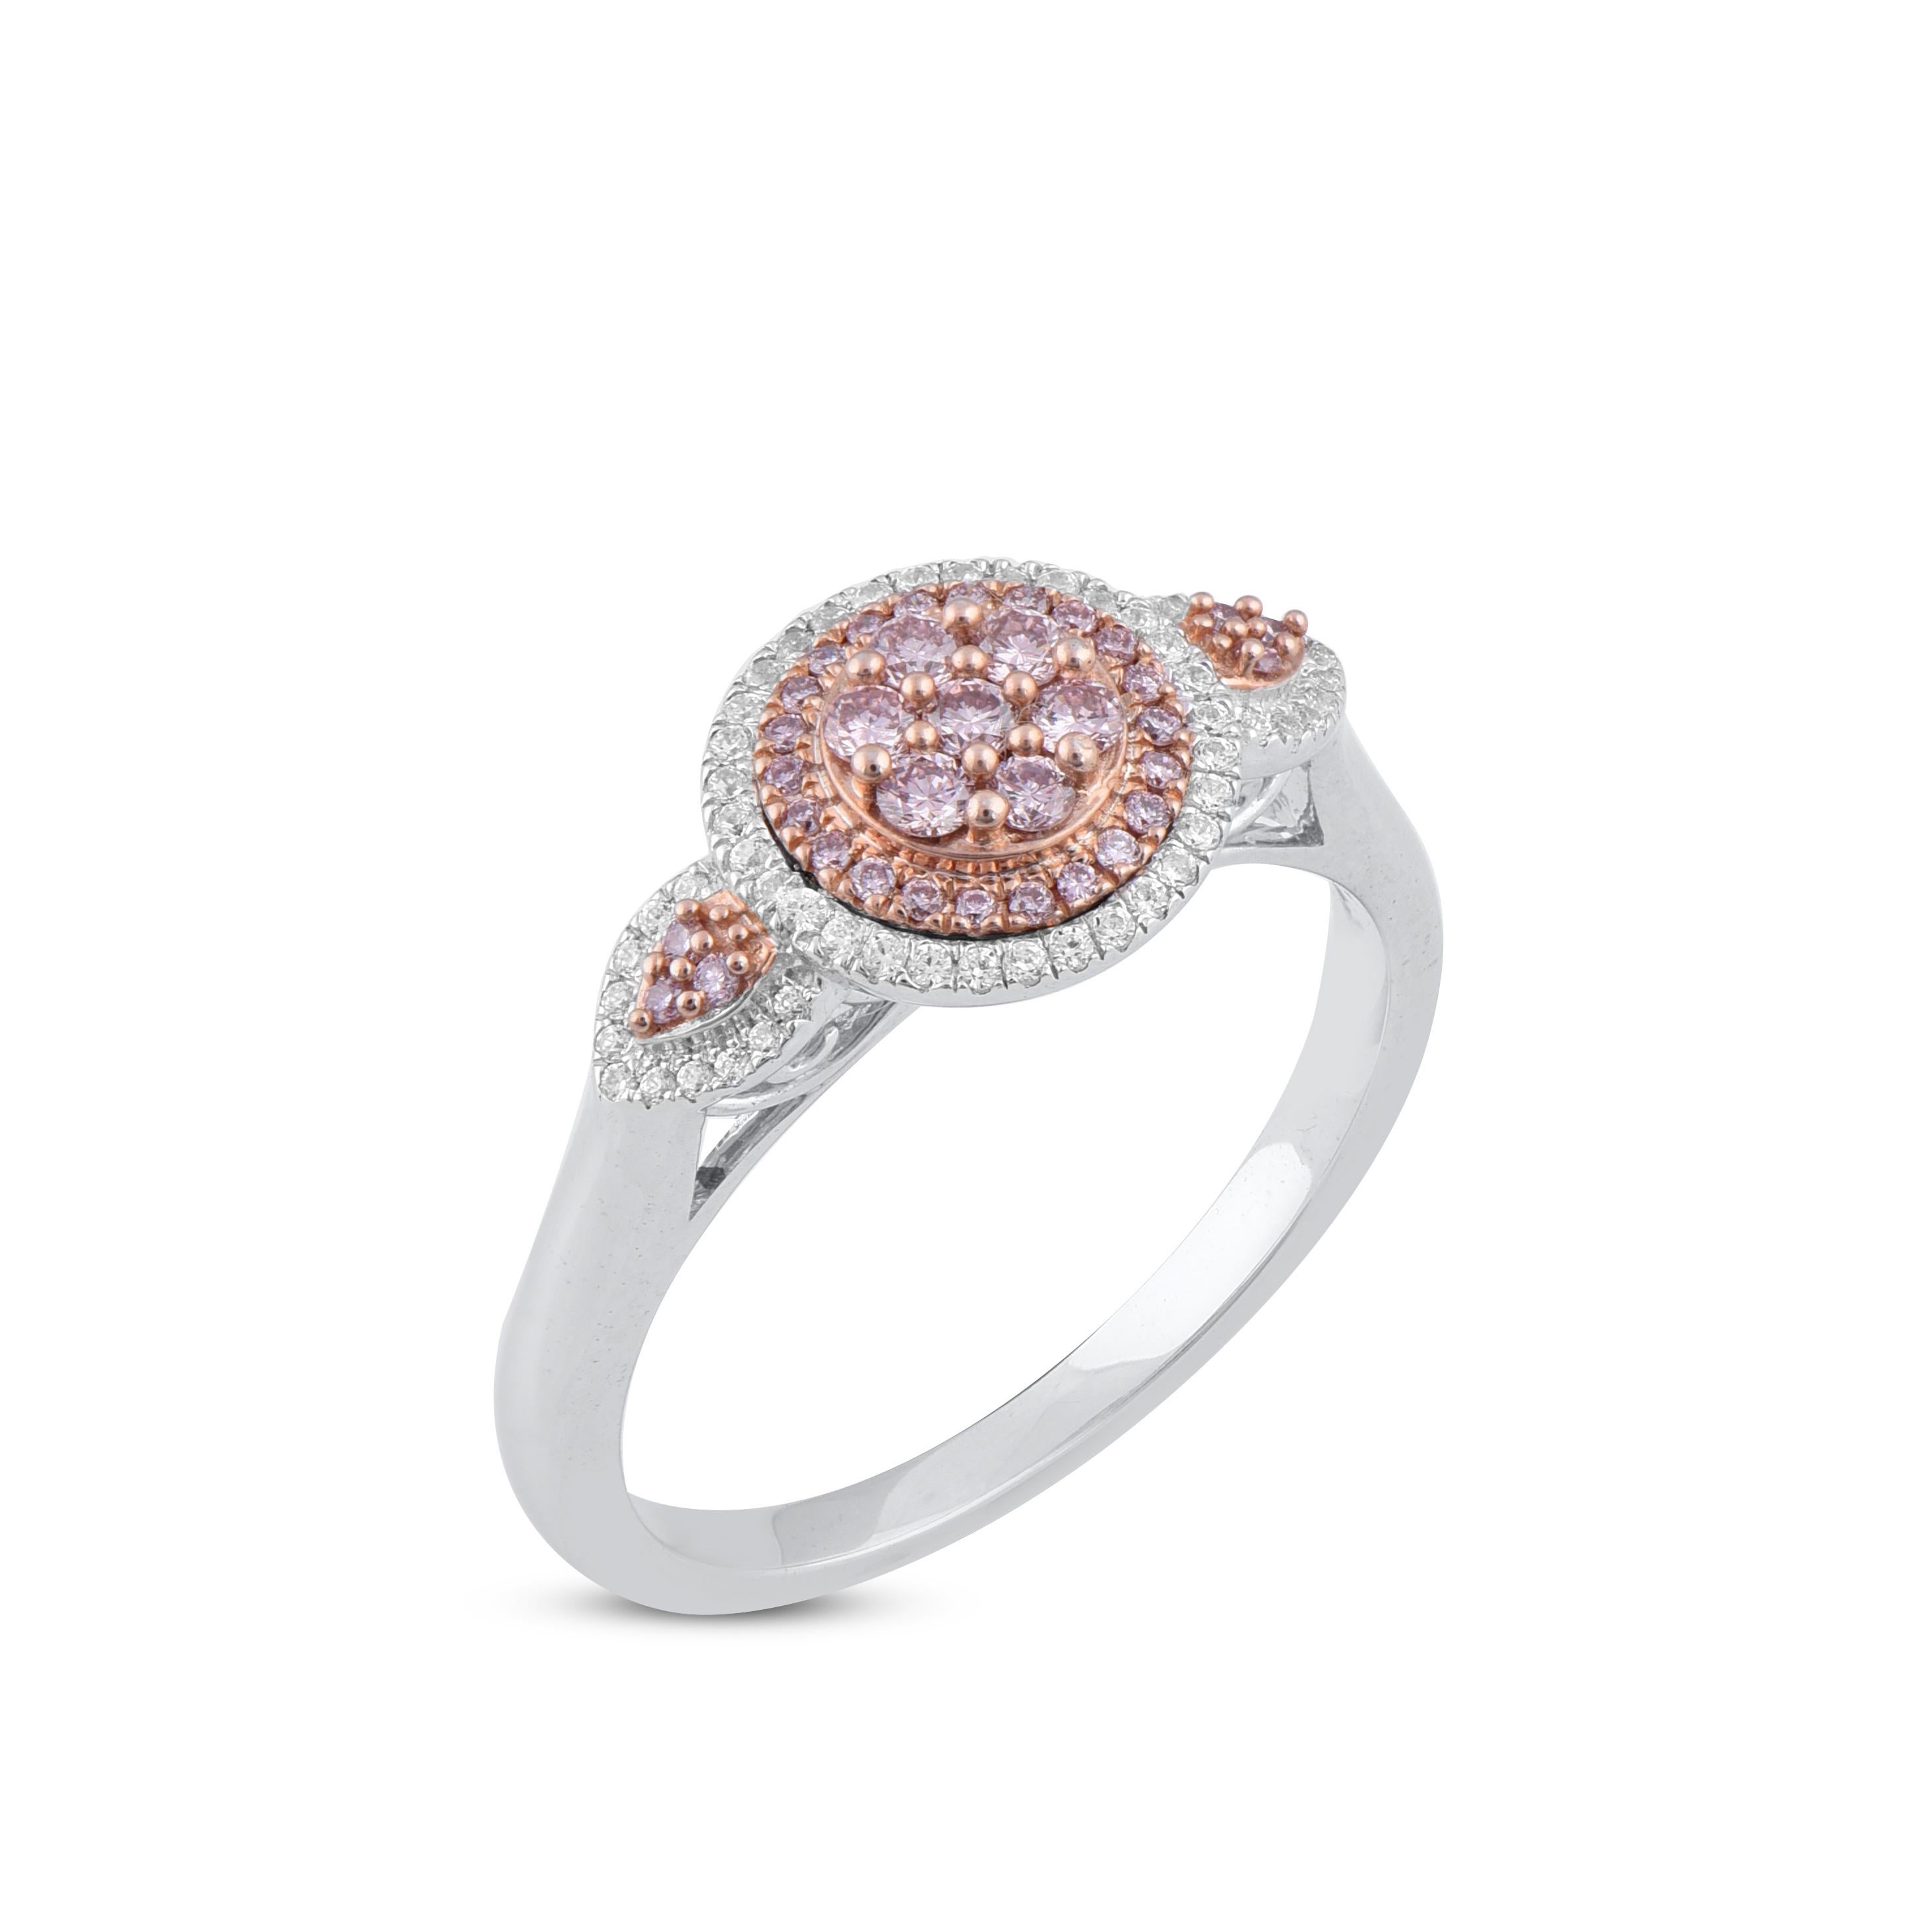 Bold and classic, these diamond engagement ring are a jewelry box must-have. Crafted in cool 18 karat 2-tone gold and studded with 55 white and 35 pink diamond set in prong and pave setting and shines in H-I color I1 clarity. The band captivate with